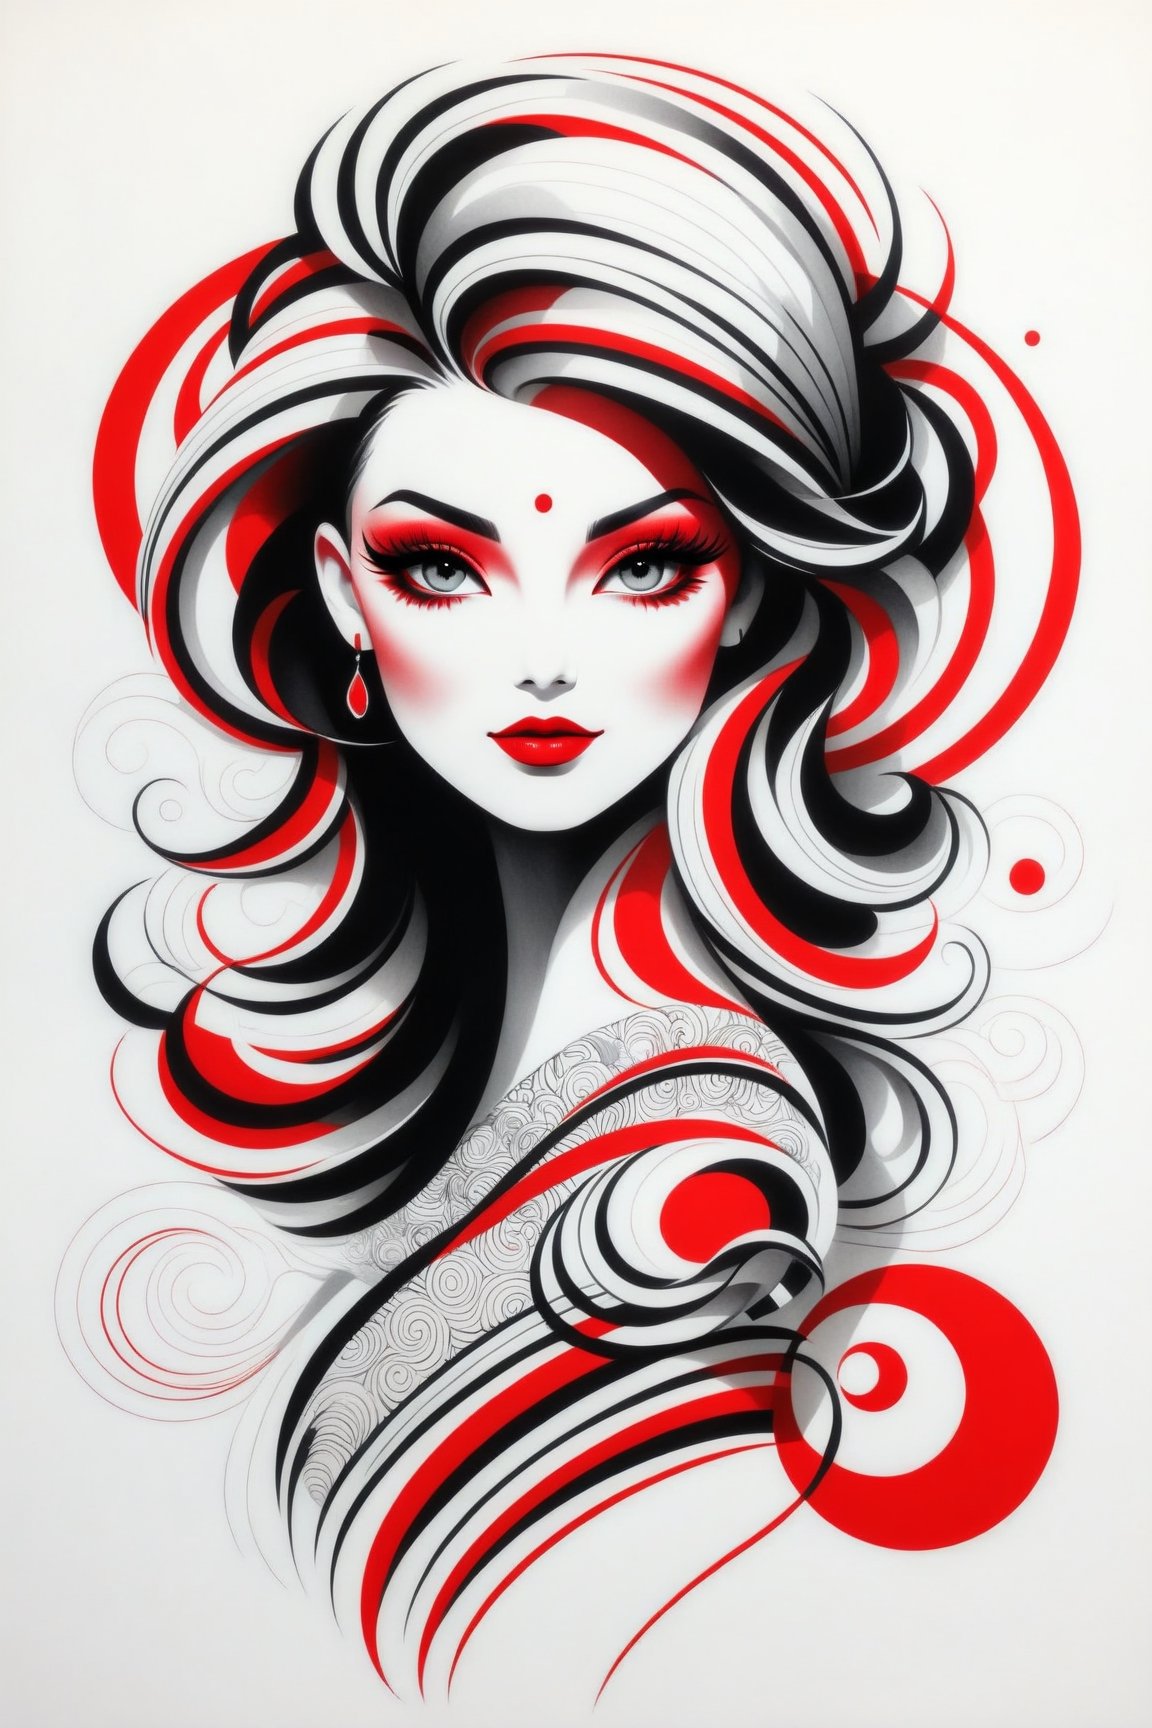 lineart tattoo design, geometric forms with red stripes superimposed, ((drawing lines)), drawing in black and withe, thick lines, filagree, realistic, silkscreen dot pattern in background, white background, monster, Leonardo Style,Pencil Draw,Fashion Illustration,Flat vector art,pencil sketch